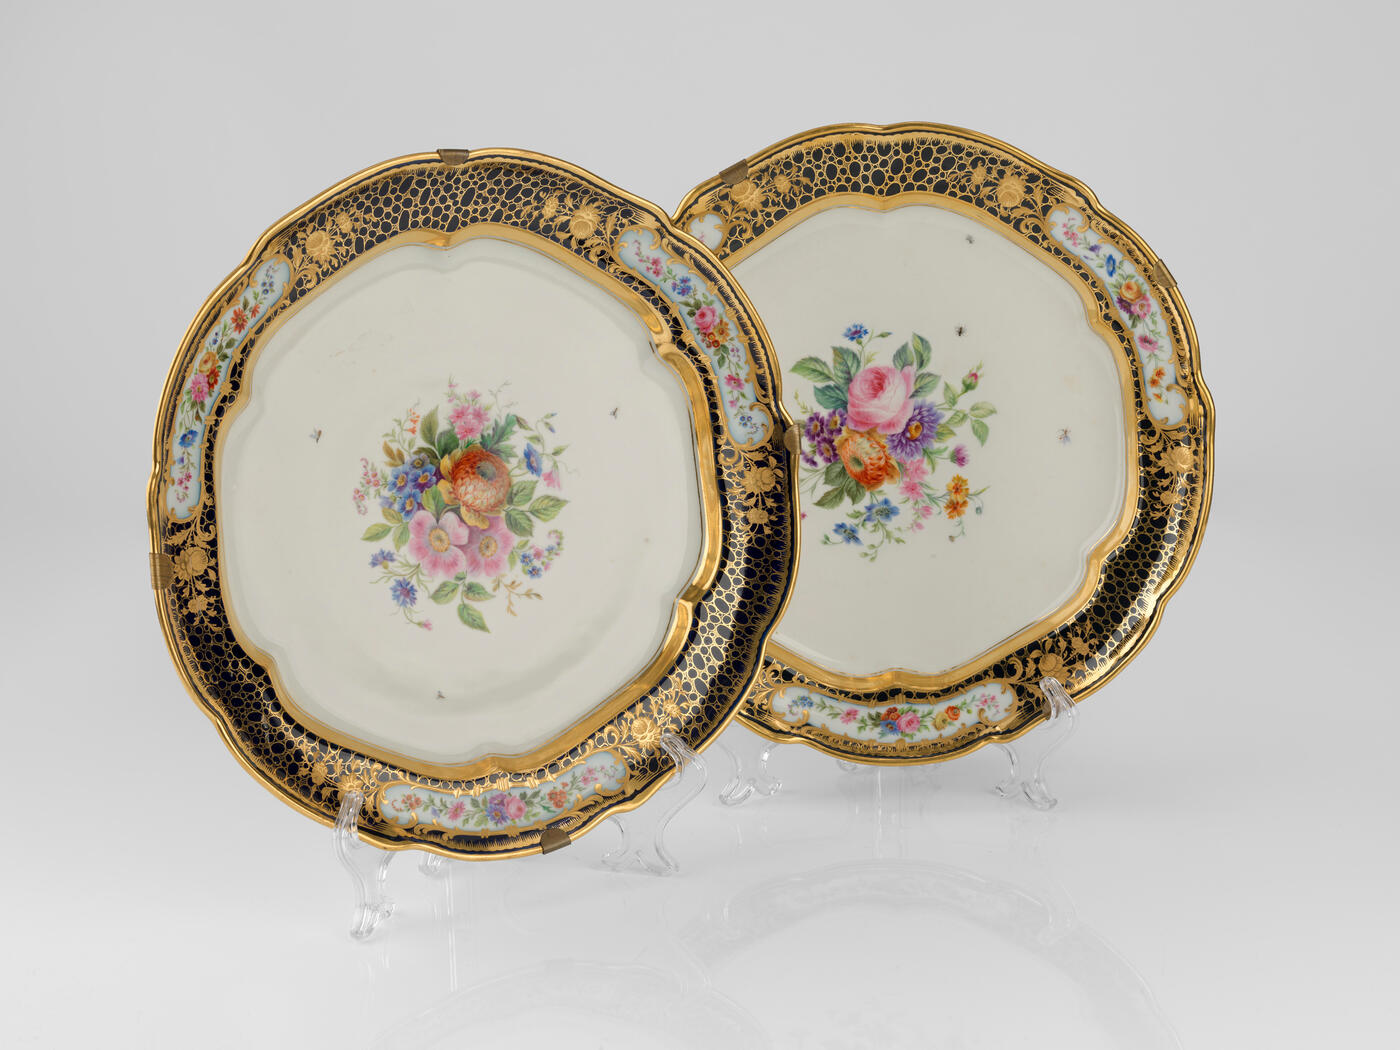 A Pair of Platters from the Sèvres Service